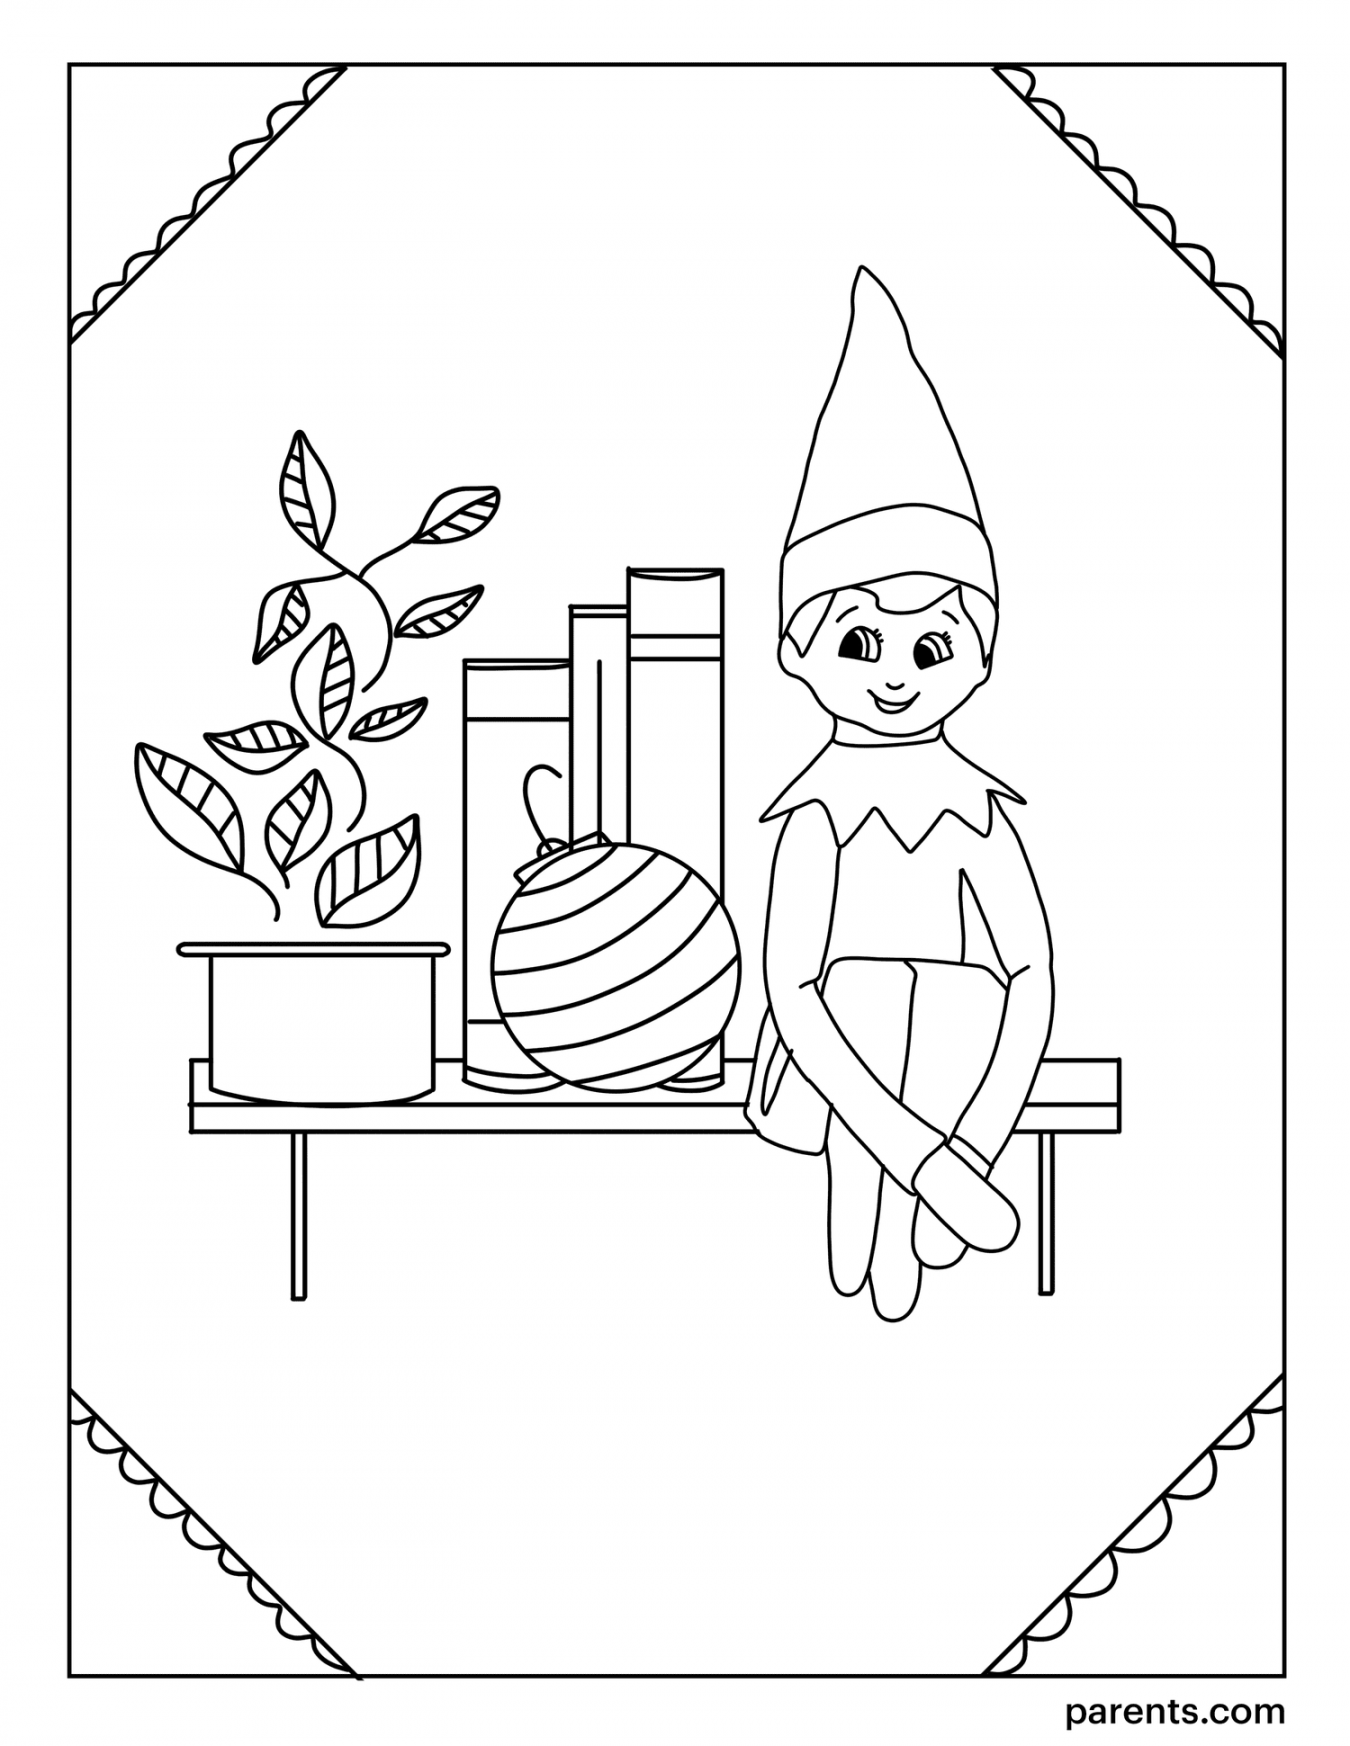 Elf on the Shelf Inspired Coloring Pages for Kids - FREE Printables - Free Printable Elf On The Shelf Coloring Pages